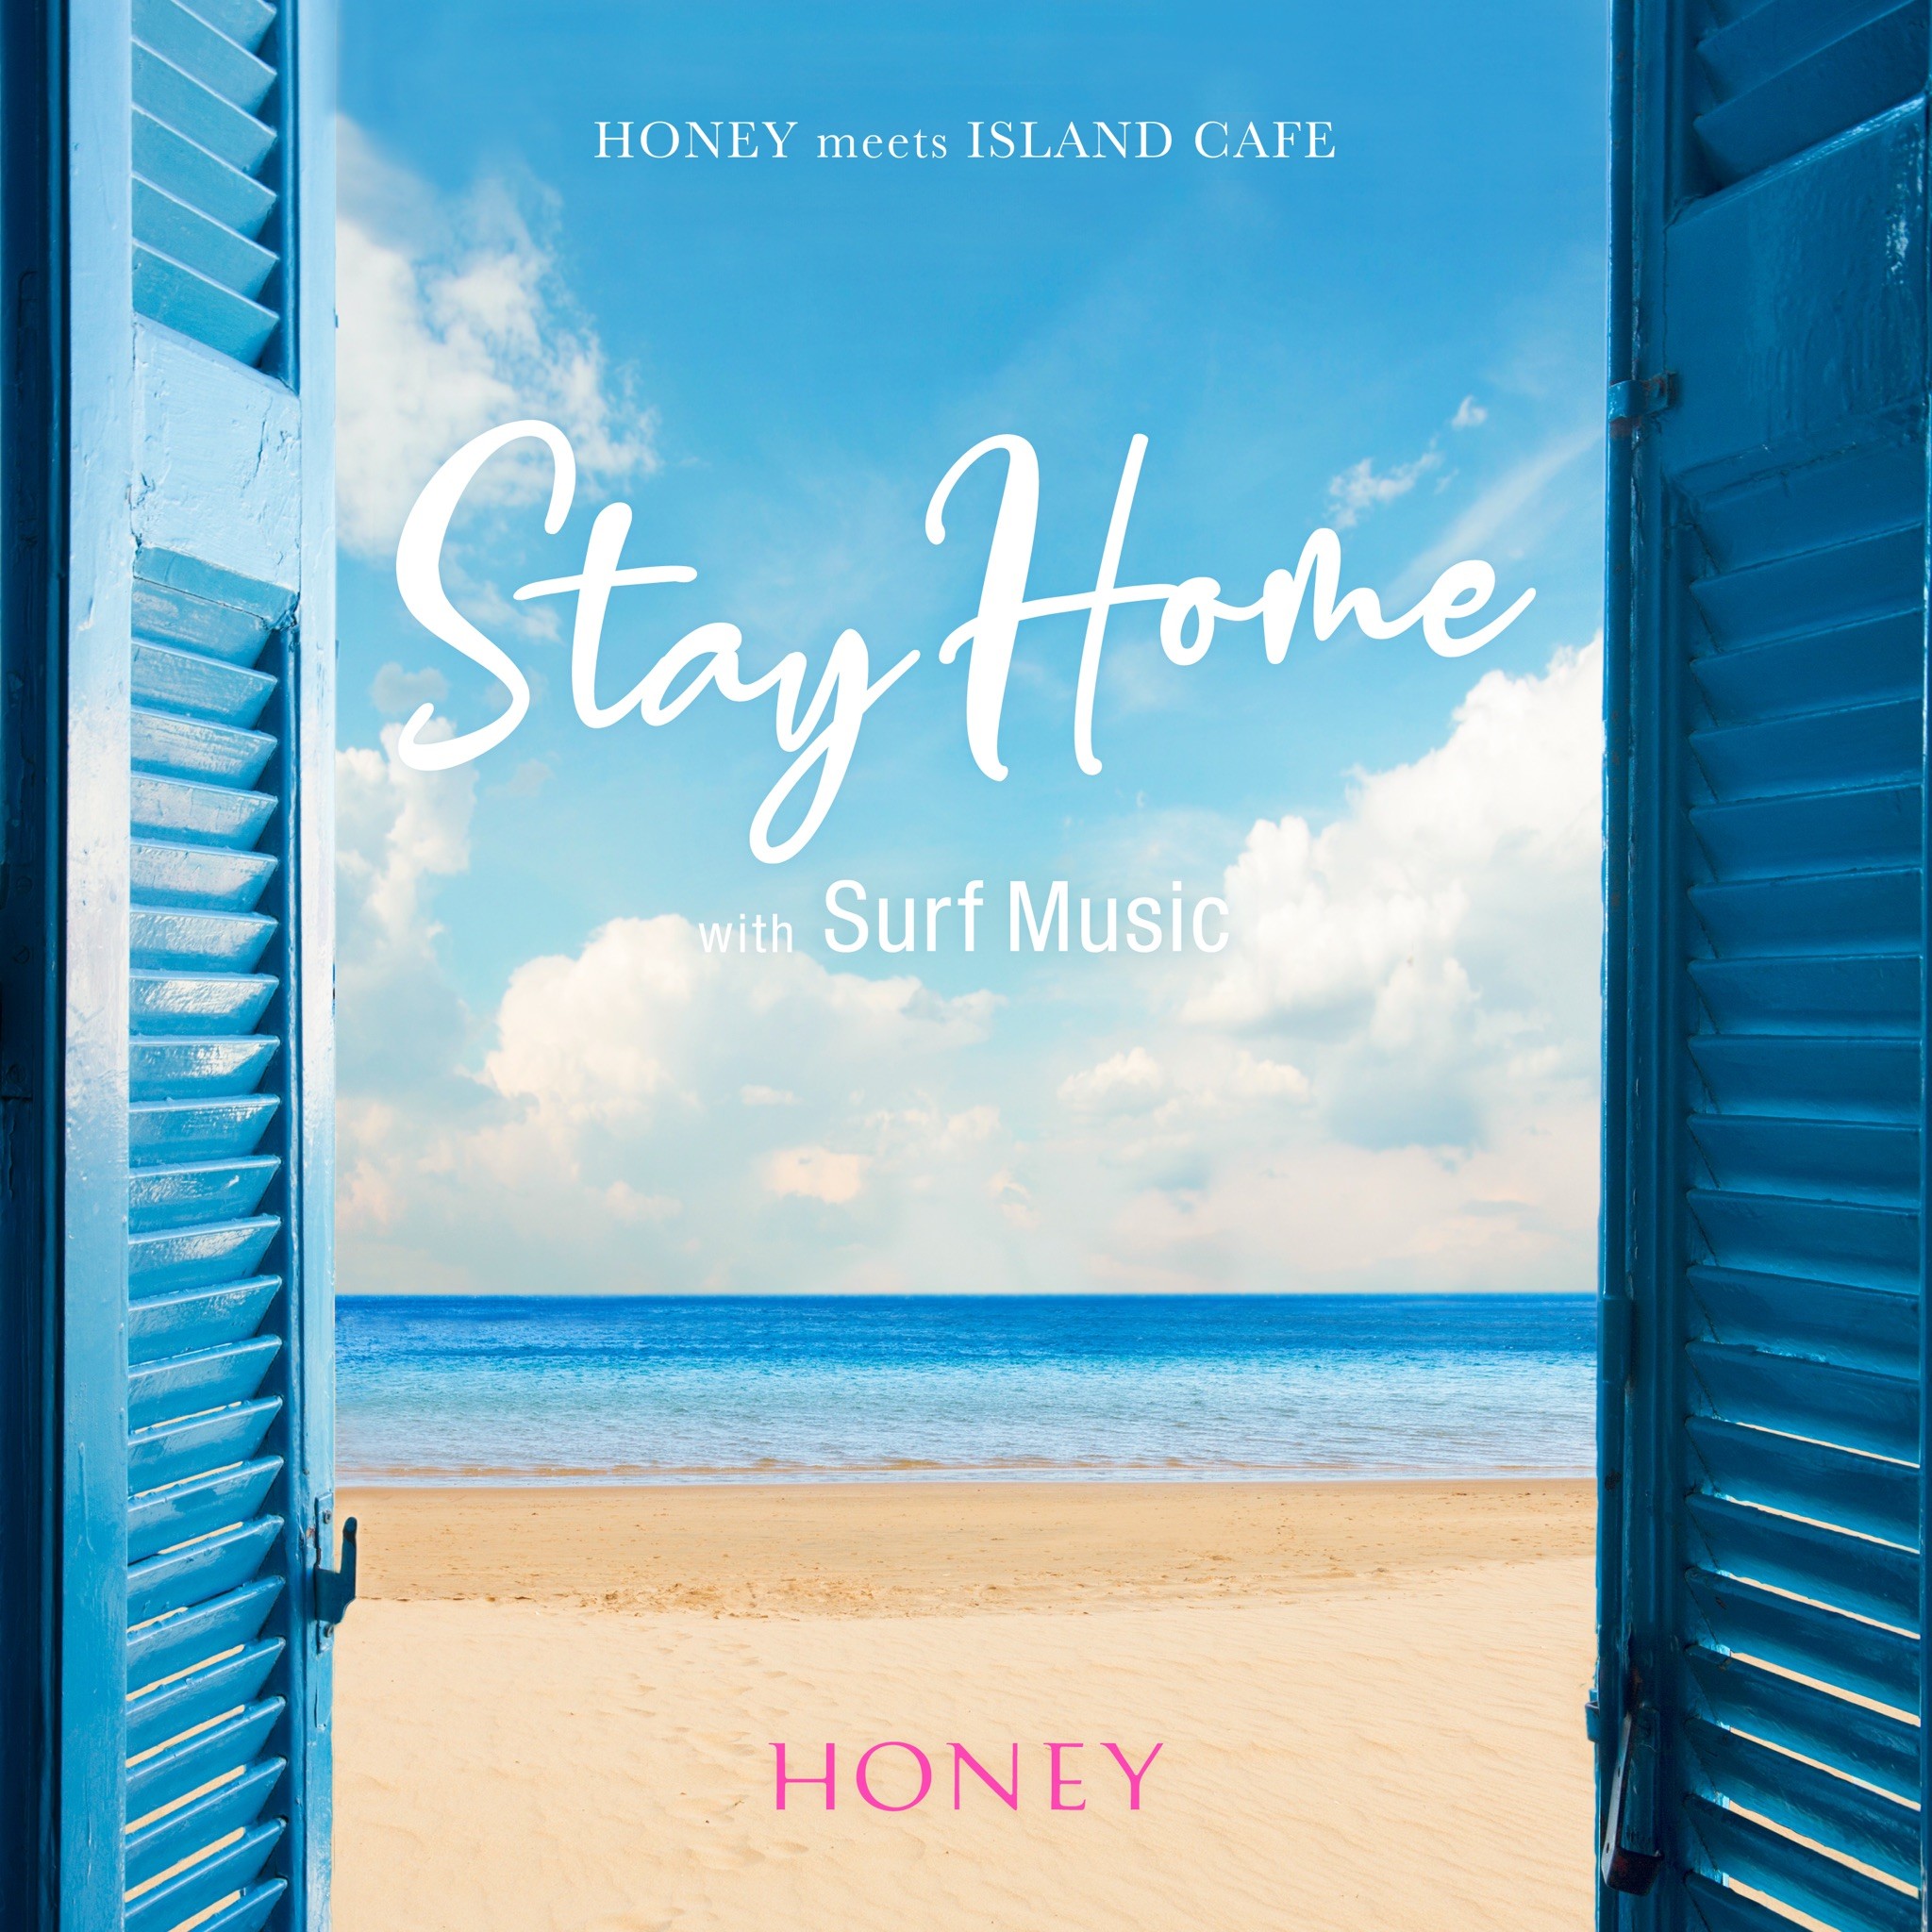 Stay Home with Surf Music」